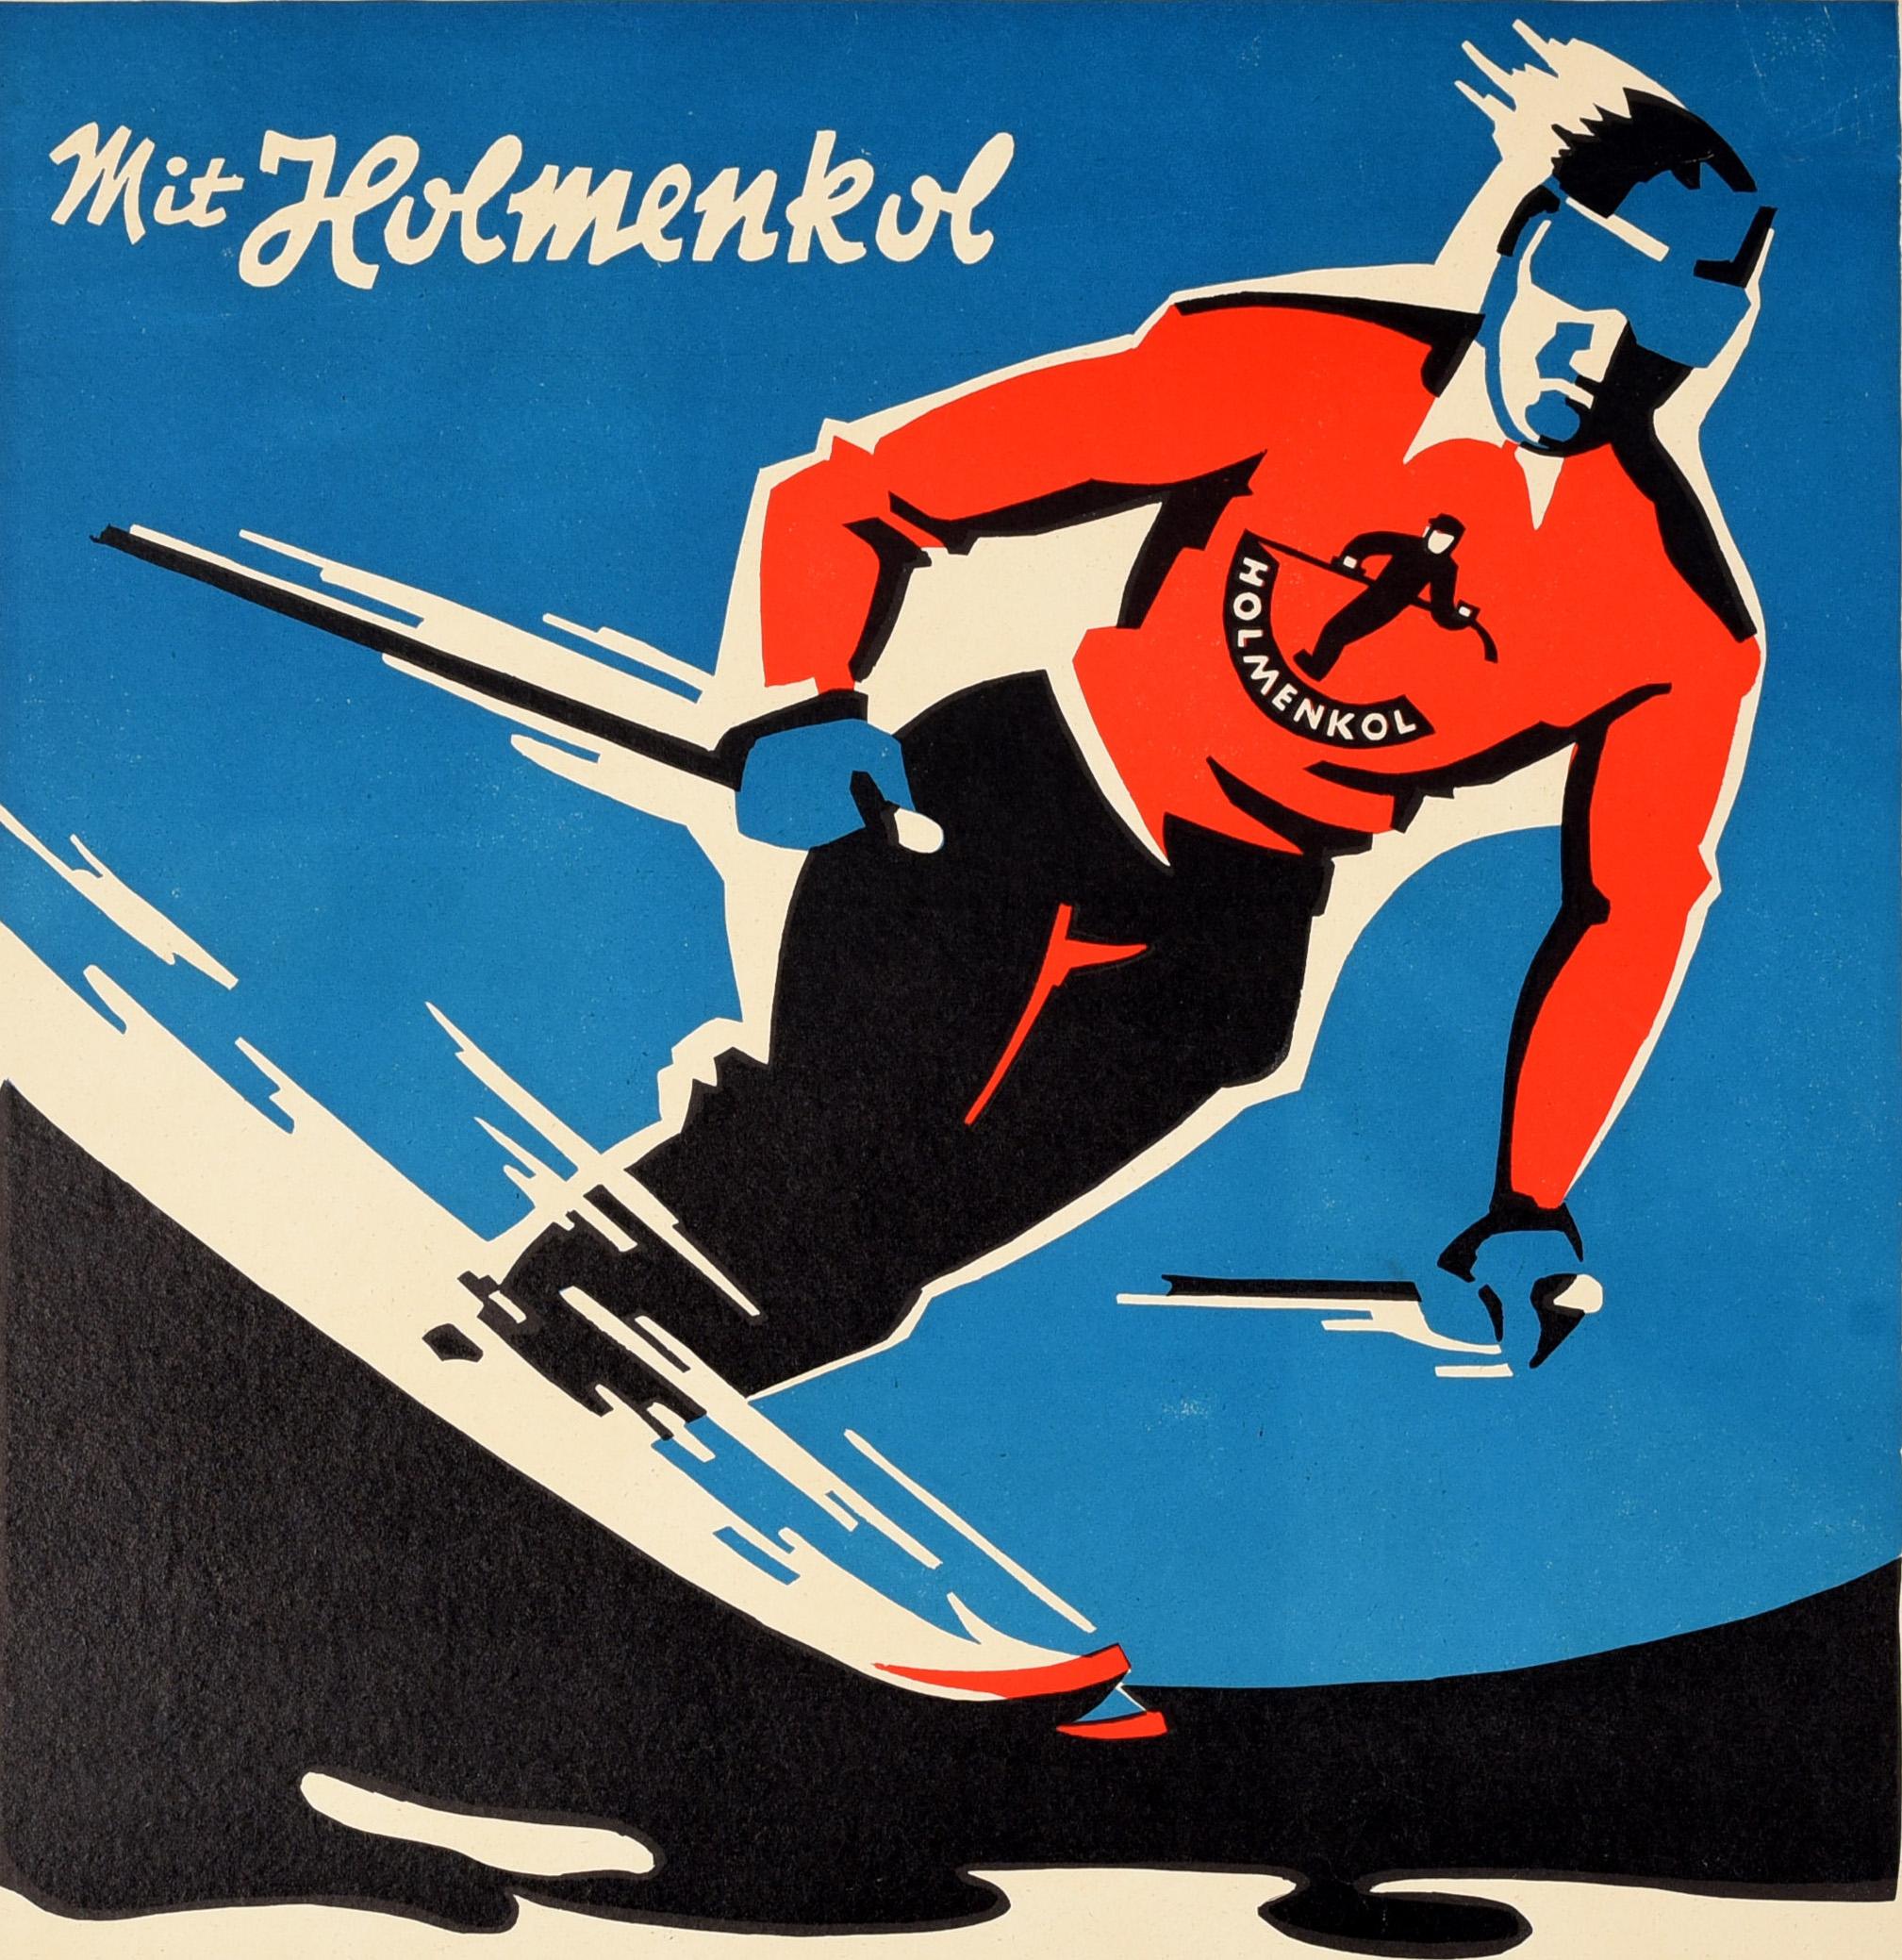 Original vintage ski wax advertising poster - With Holmenkol / Mit Holmenkol - featuring a dynamic illustration of a skier skiing down a slope at speed with the brand logo (an image of a man and the text Holmenkol) on his red top, the rest of the